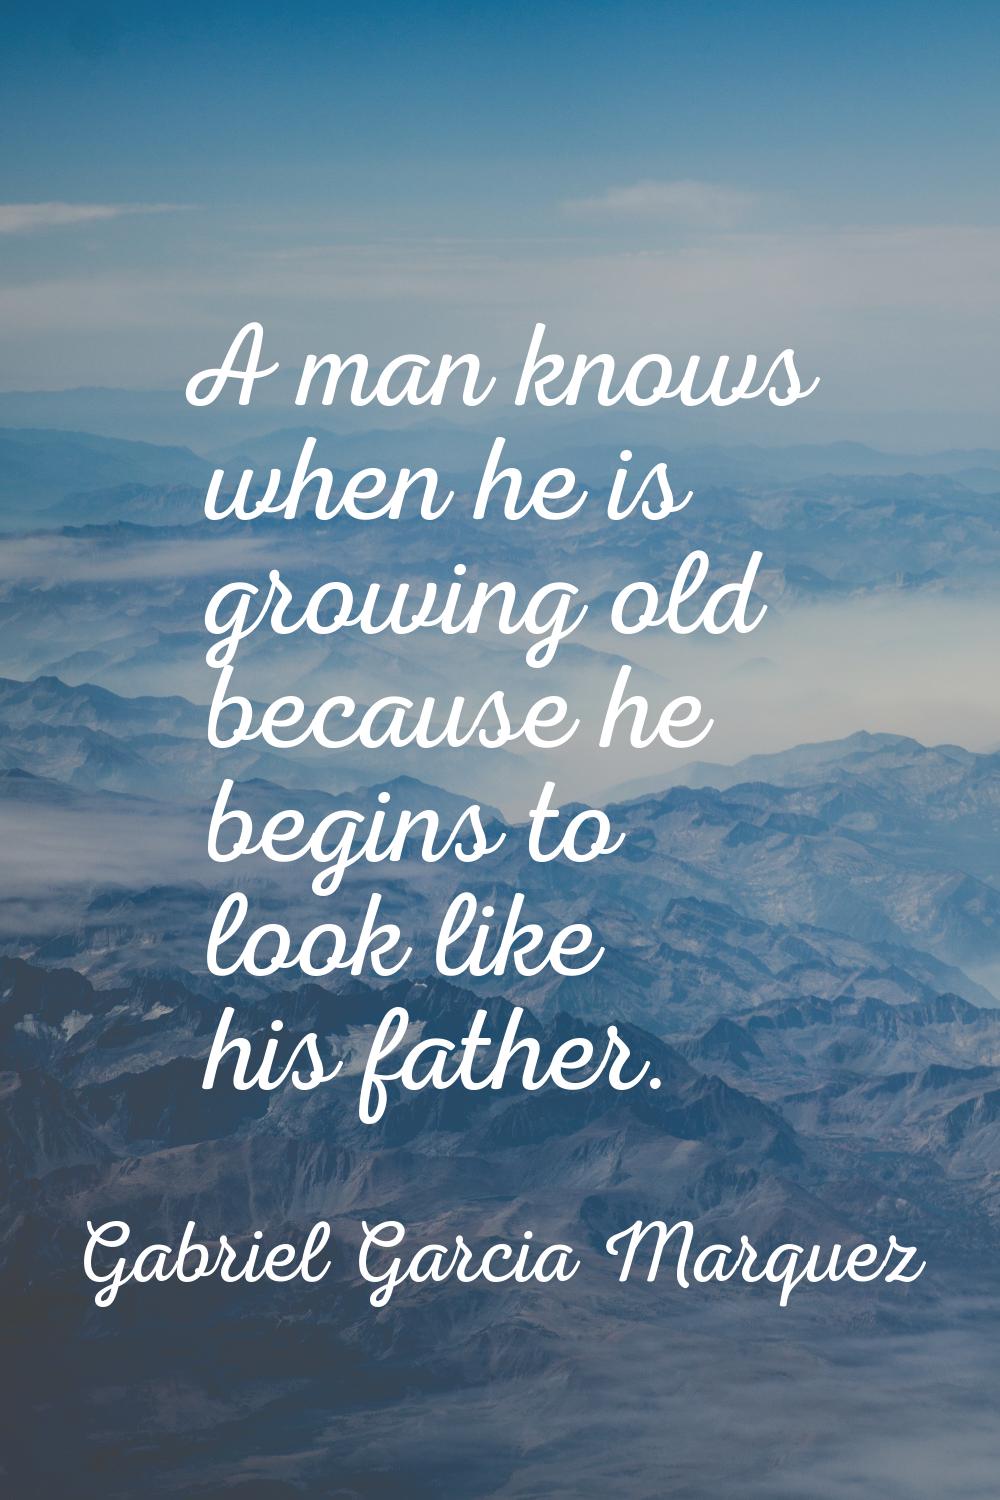 A man knows when he is growing old because he begins to look like his father.